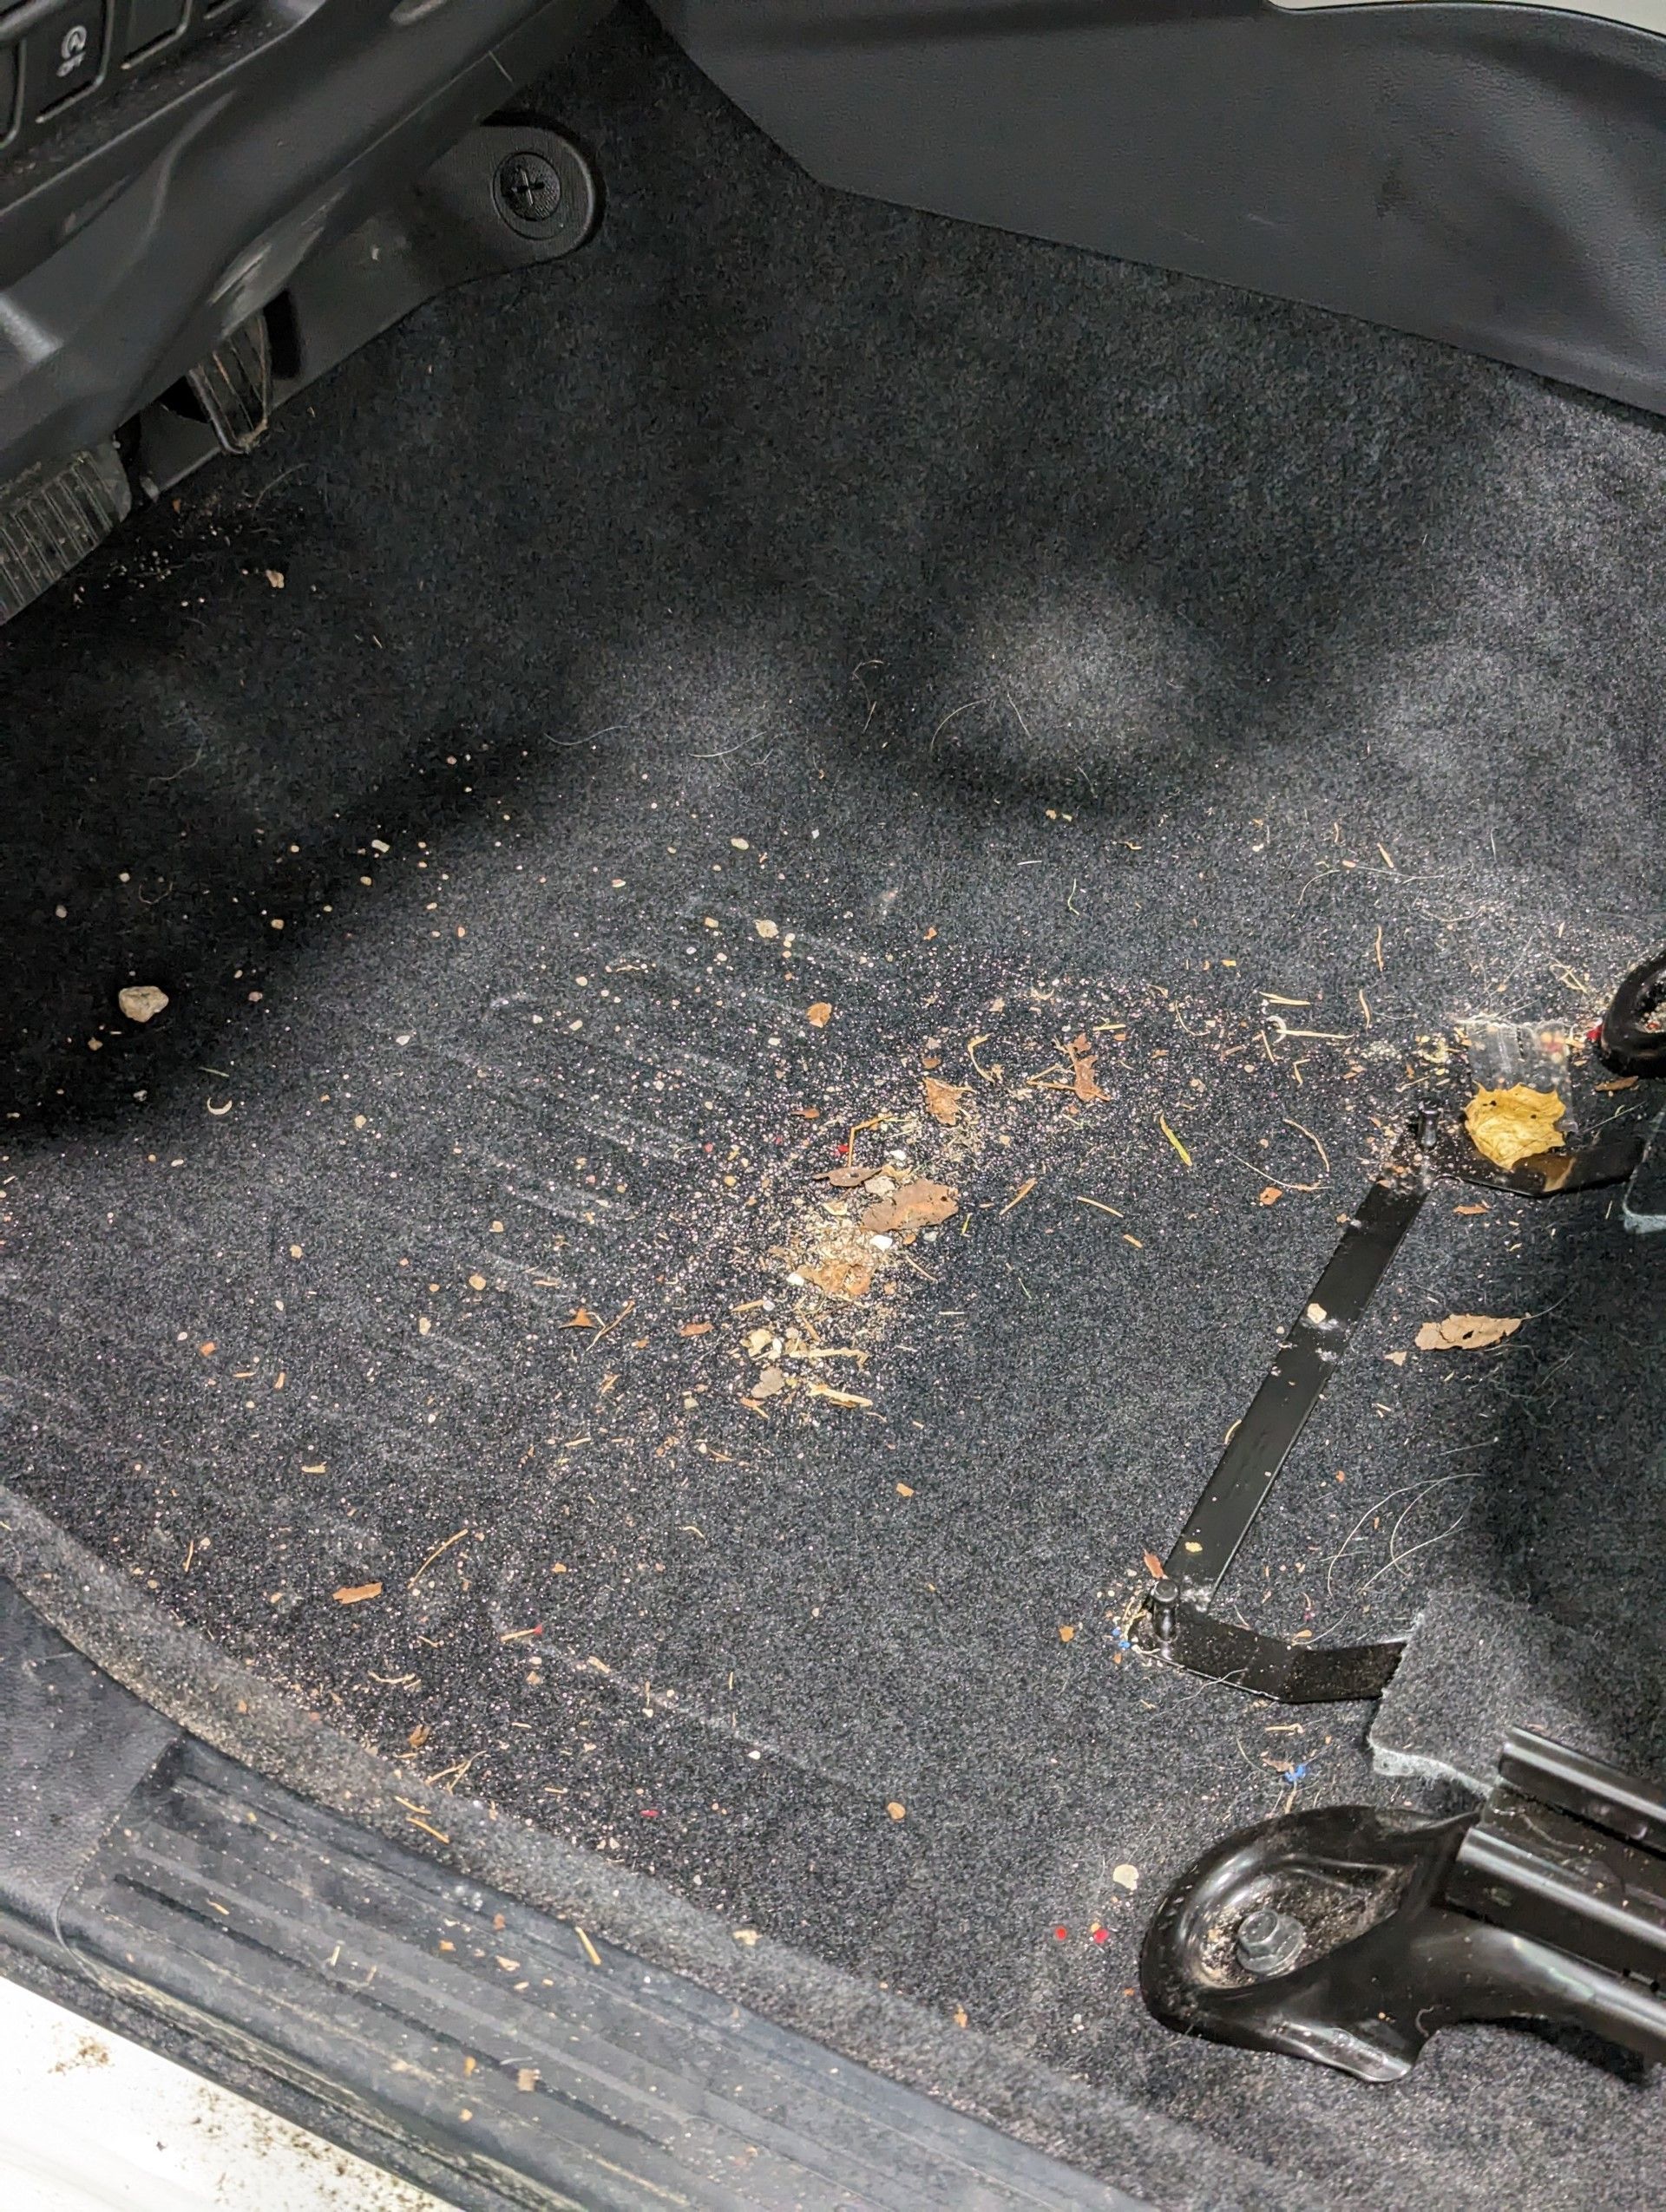 Before Interior Detailing - The floor of a car is covered in dust and dirt.